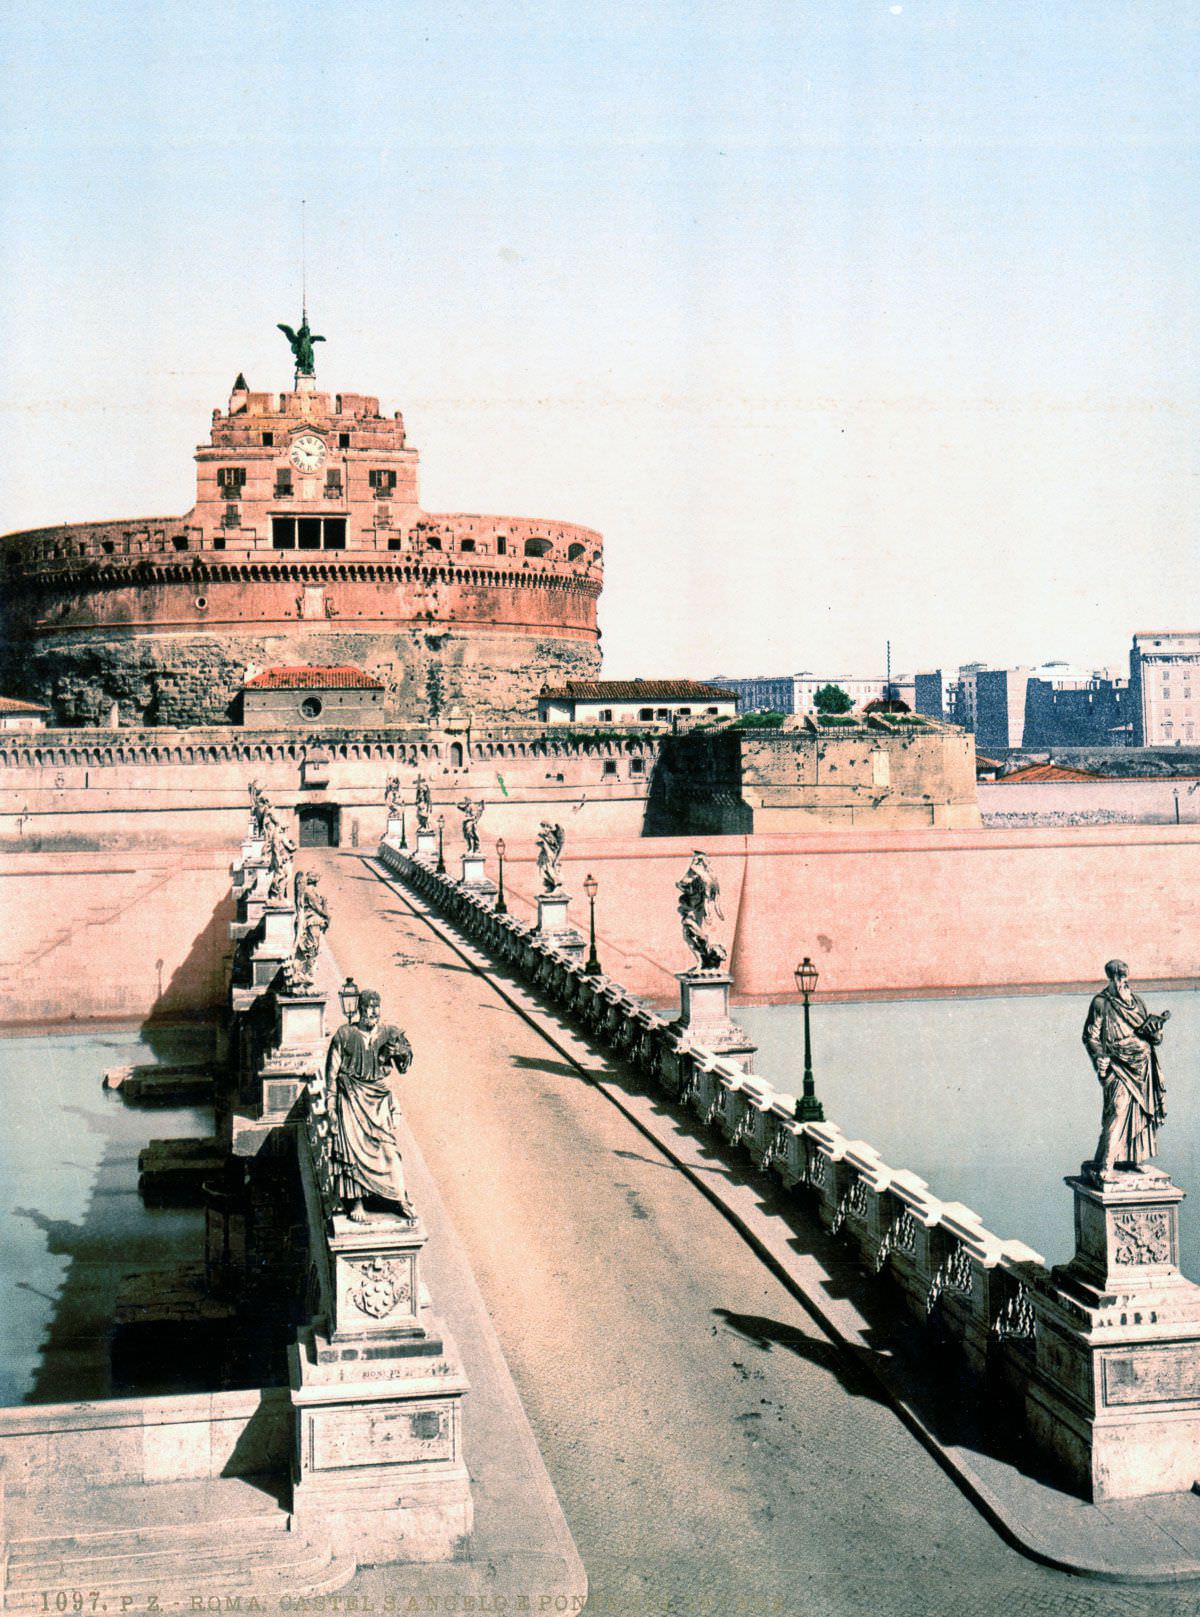 The bridge and castle of St. Angelo.